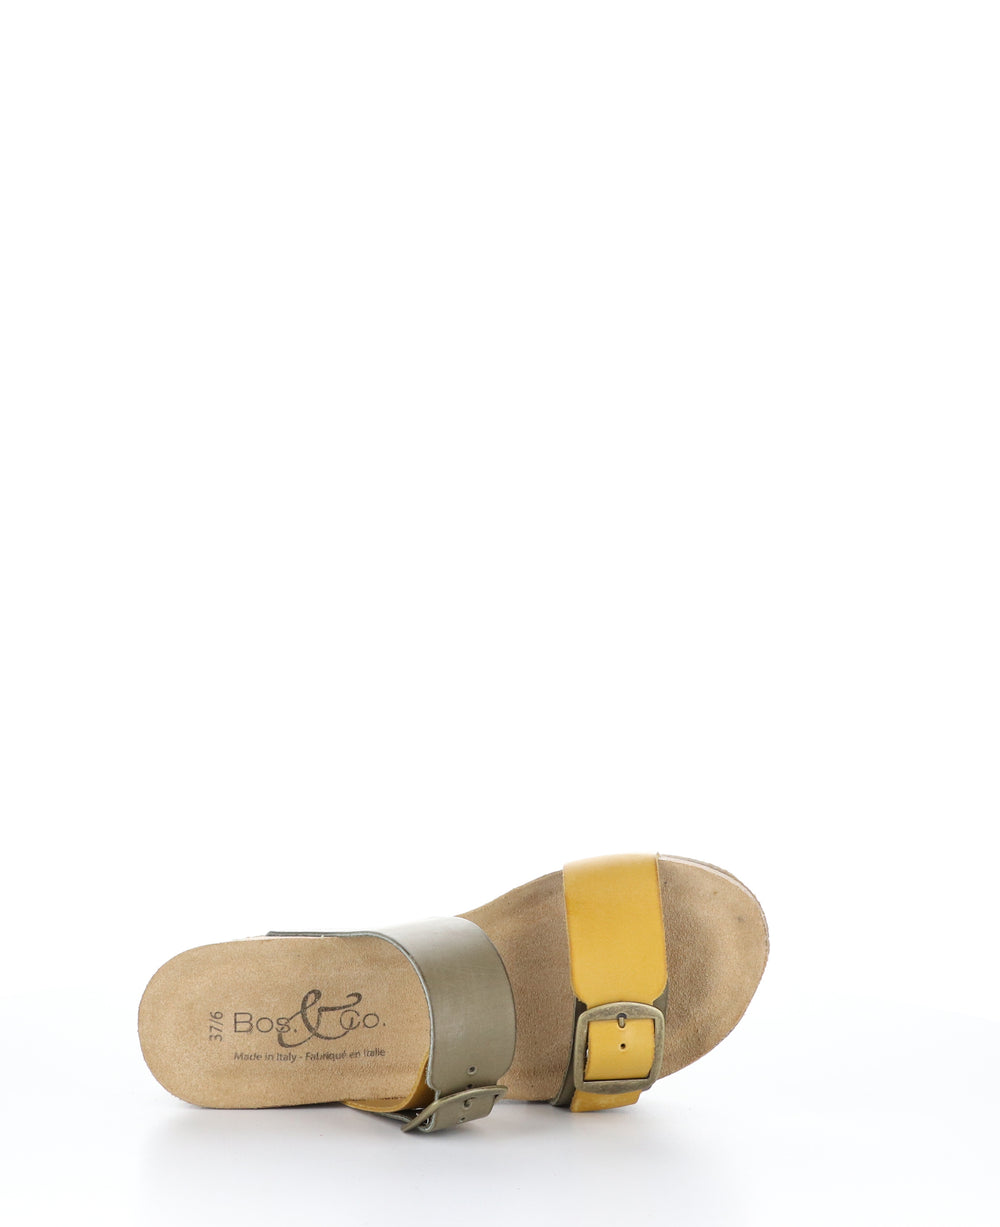 LAWT FANGO TAUPE/YELLOW Wedge Sandals